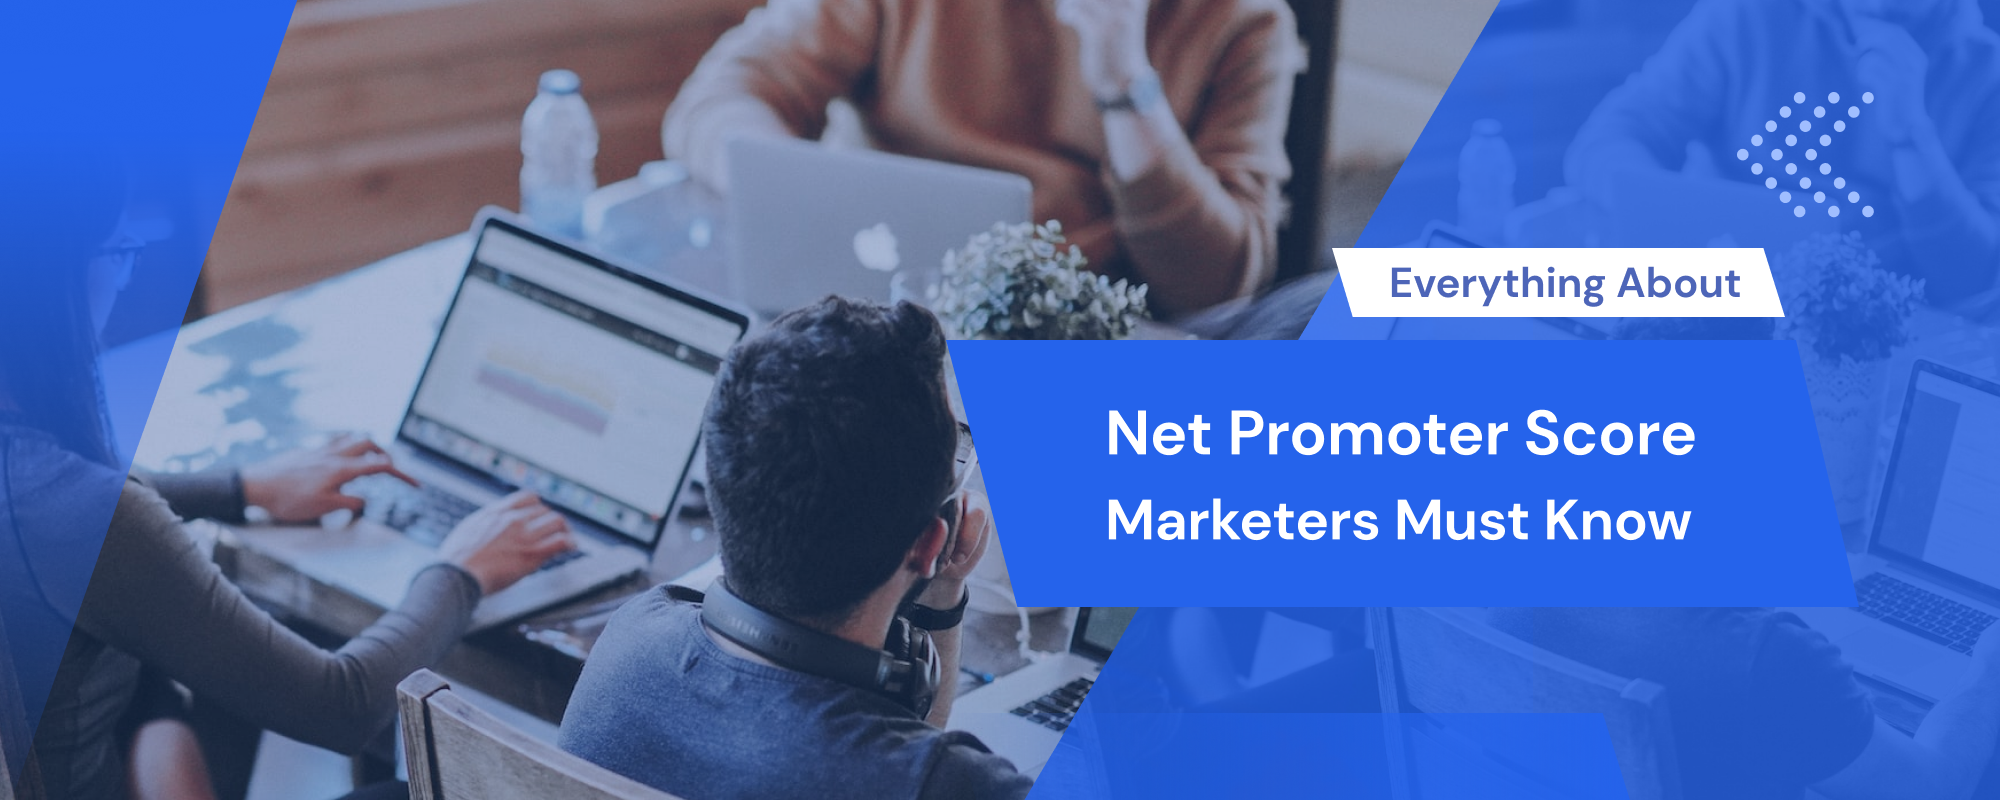 Everything about Net Promoter Score marketers must know